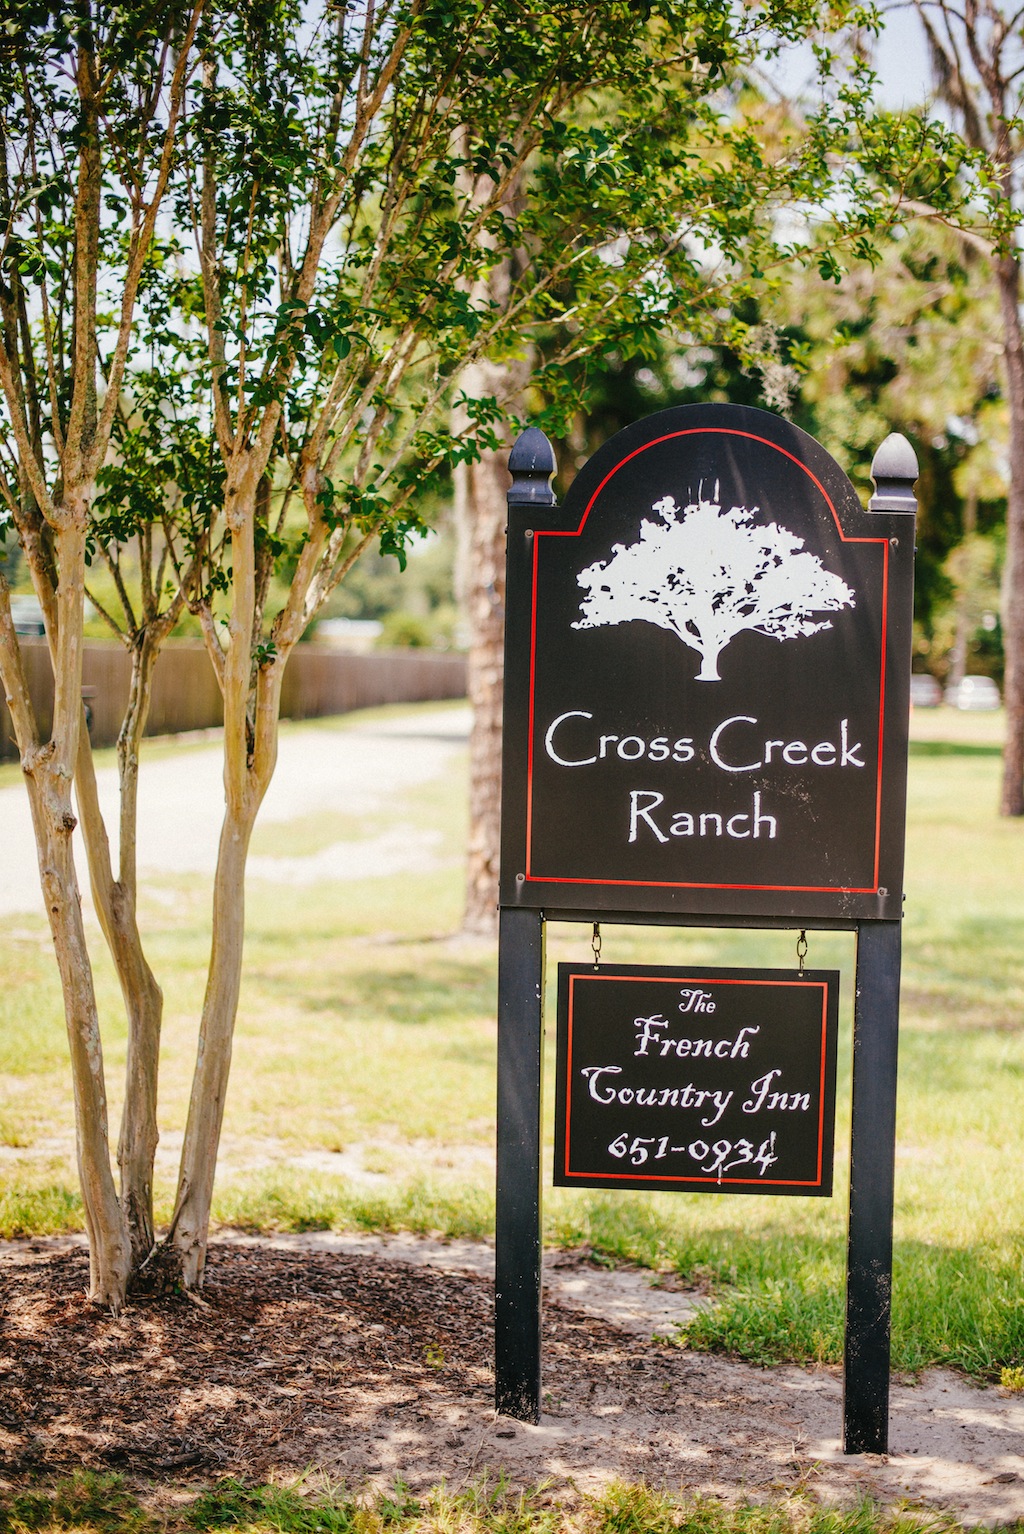 Cross Creek Ranch Wedding near Tampa Bay, Fl - Rustic Rose, Burlap and Lace by Lakeland Wedding Photographer Sunglow Photography (1)